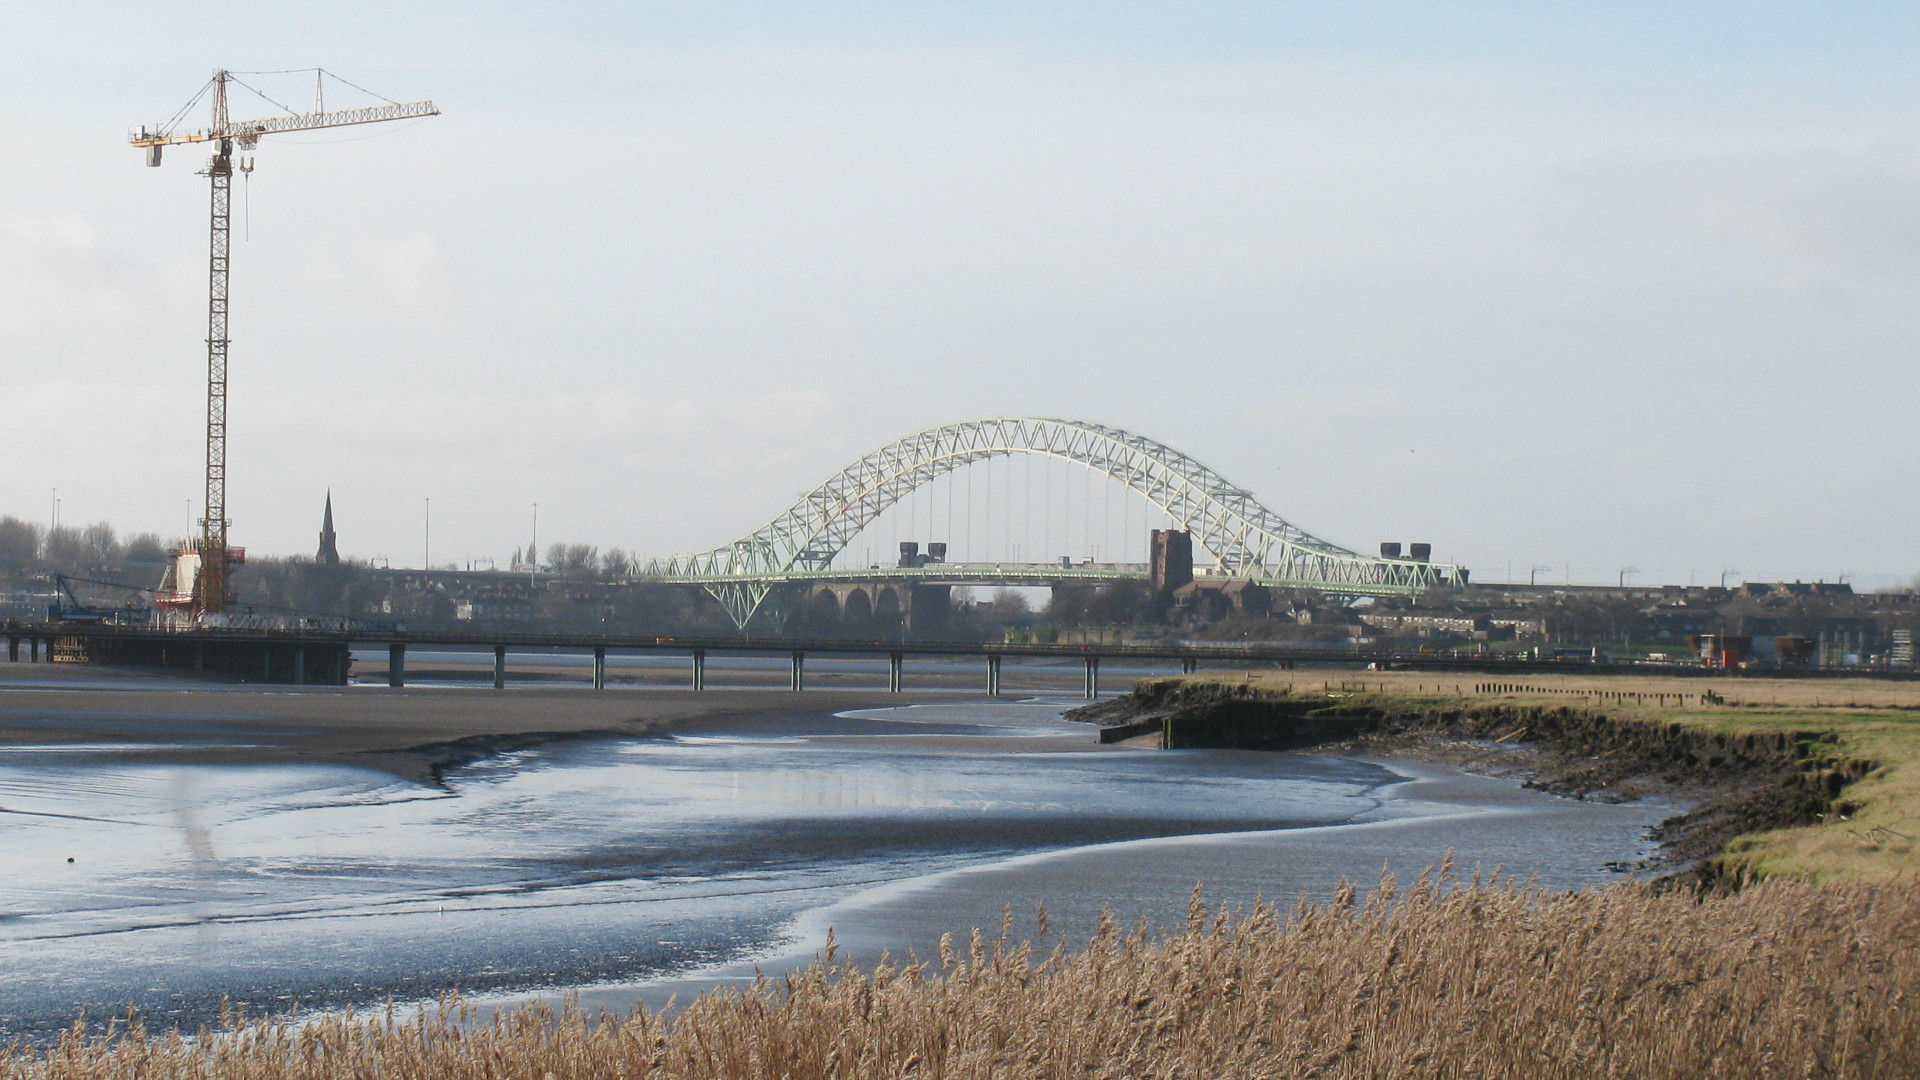 Views along the River Mersey show the Runcorn Road and Rail bridges beyond the Mersey Gateway Bridge being constructed